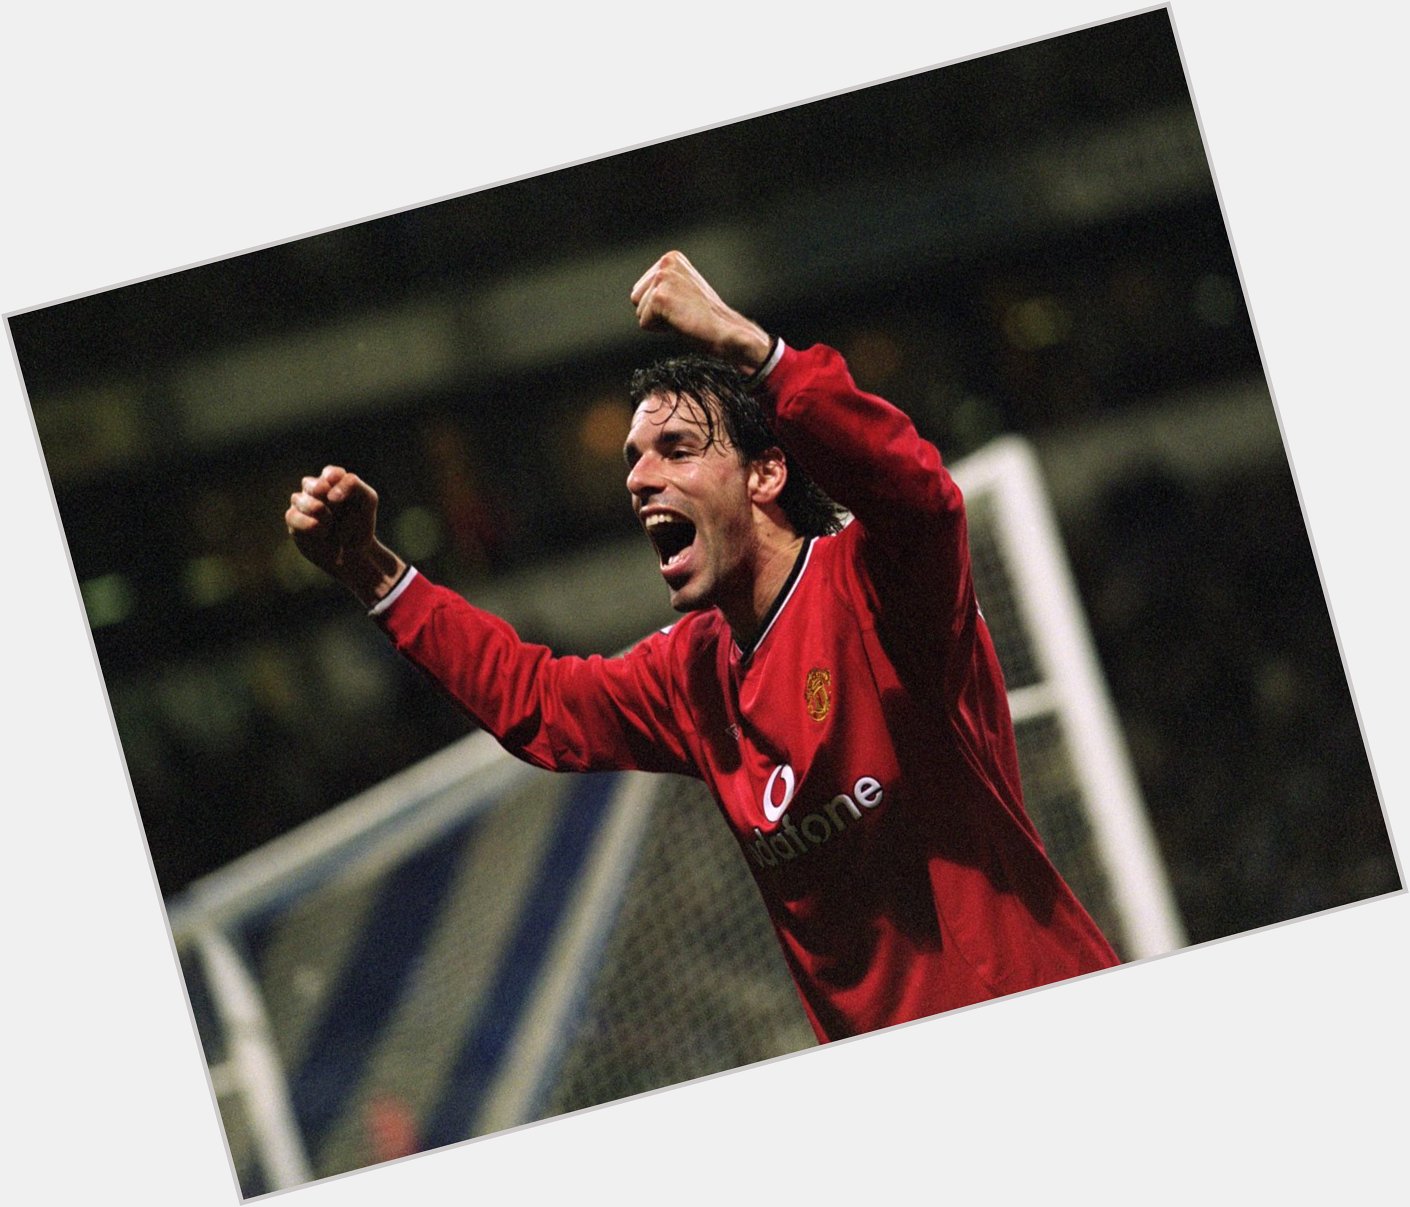 Happy 41st birthday to Ruud van Nistelrooy. 

One of the Greats 